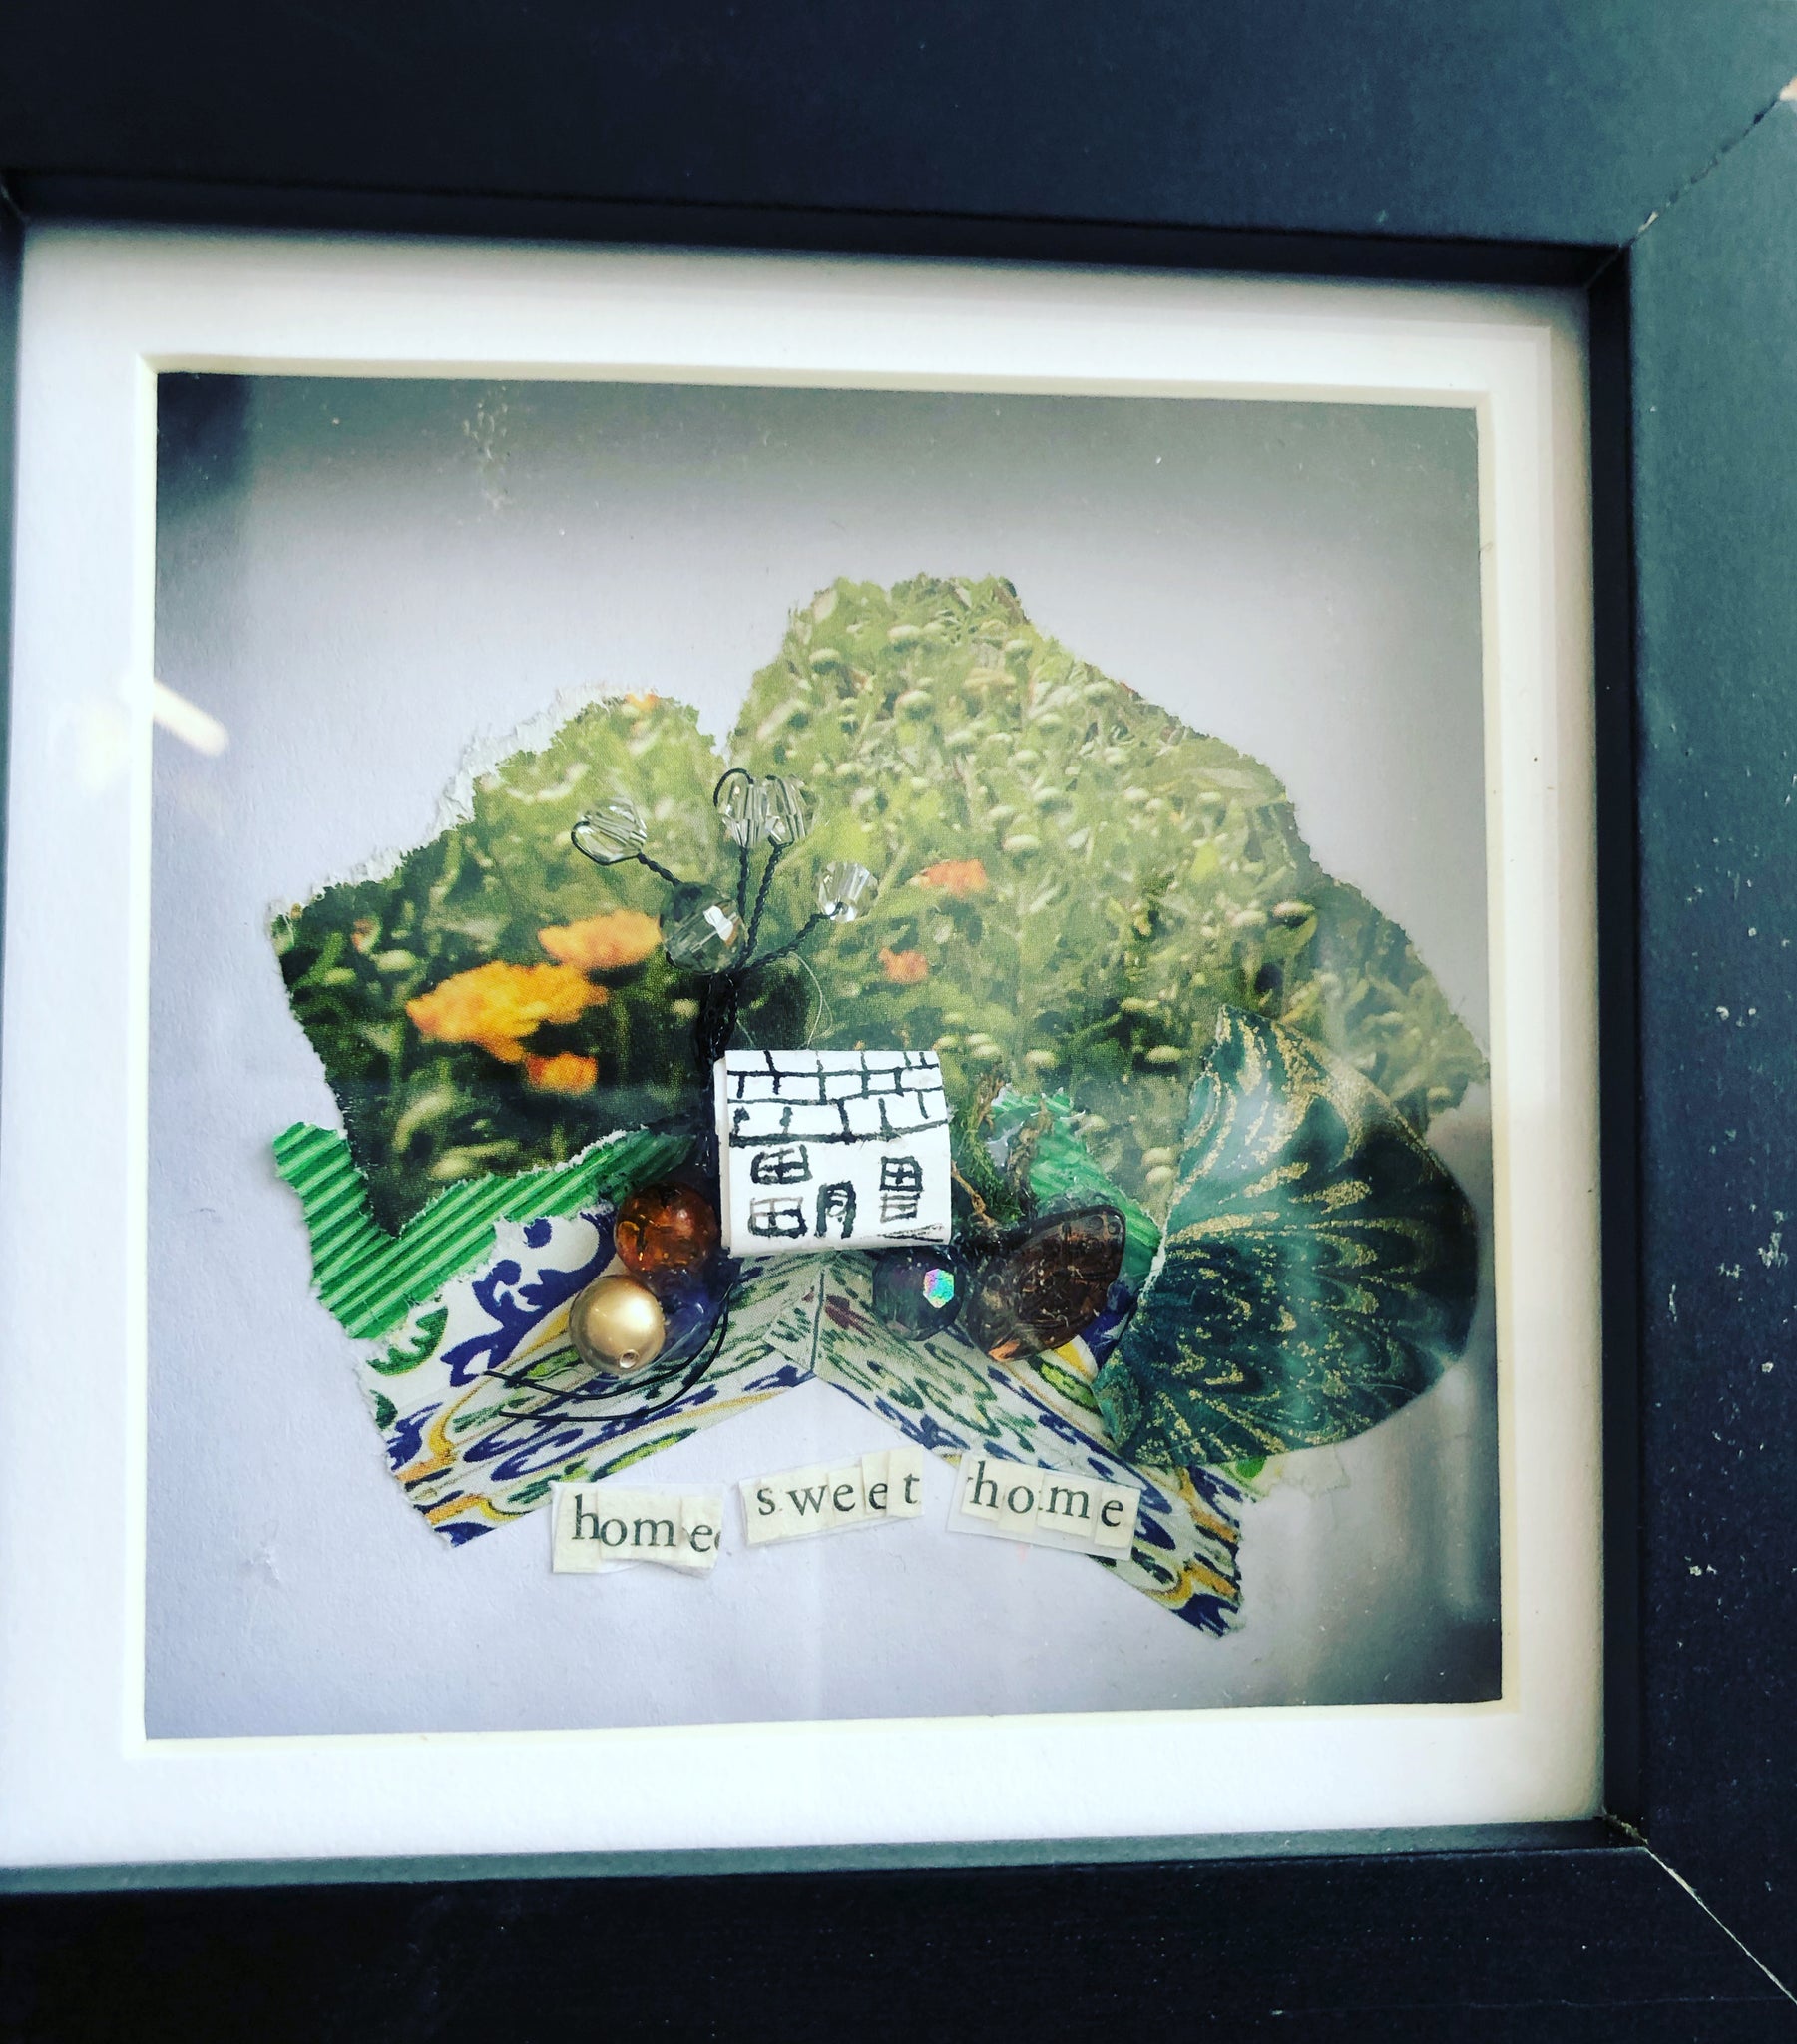 Home sweet home shadow box message